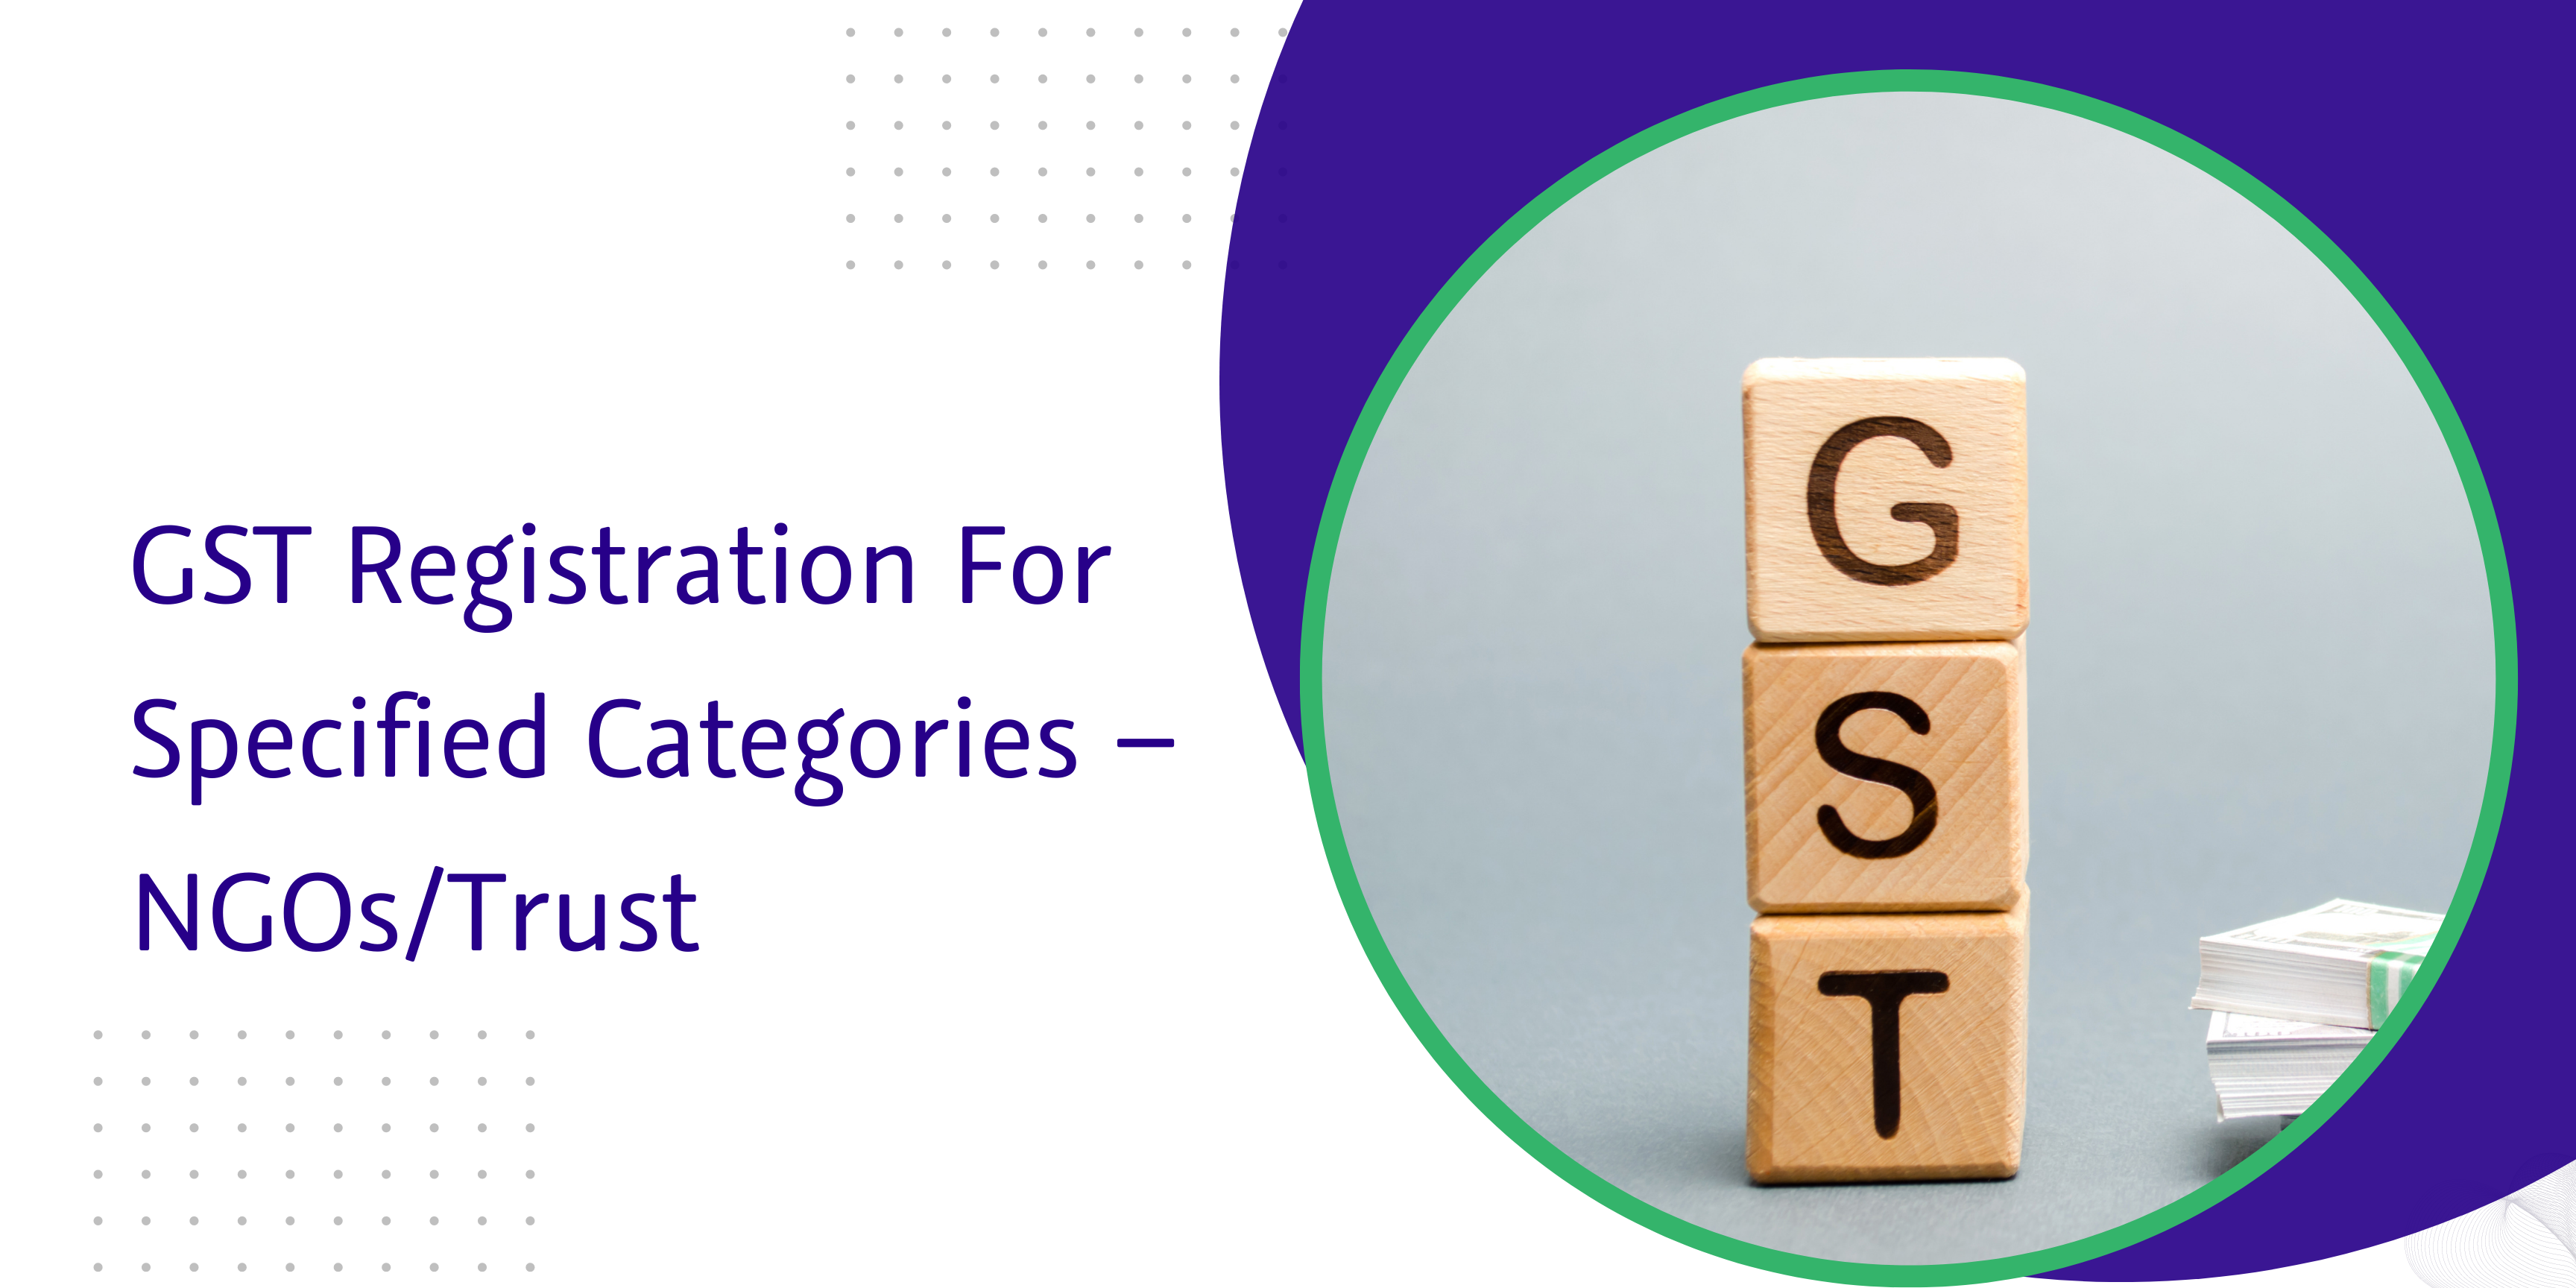 You are currently viewing GST Registration For Specified Categories – NGOs/Trust